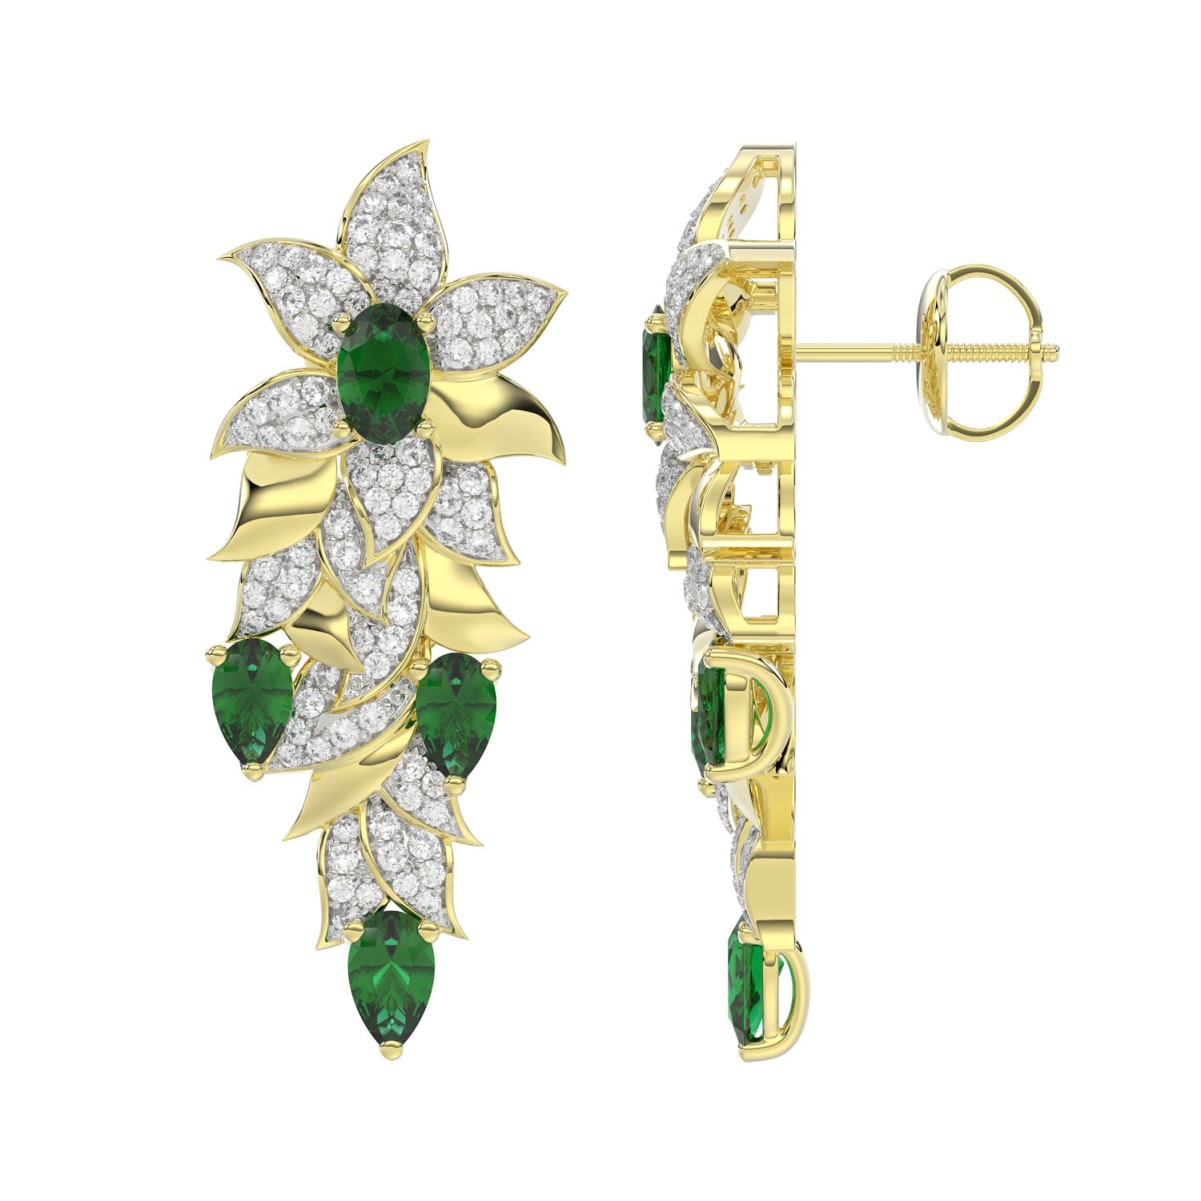 18K YELLOW GOLD 3 5/8CT ROUND/OVAL/PEAR DIAMOND LADIES EARRINGS(COLOR STONE GREEN EMERALD OVAL 1CT/PEAR DIAMOND 1 1/2CT)